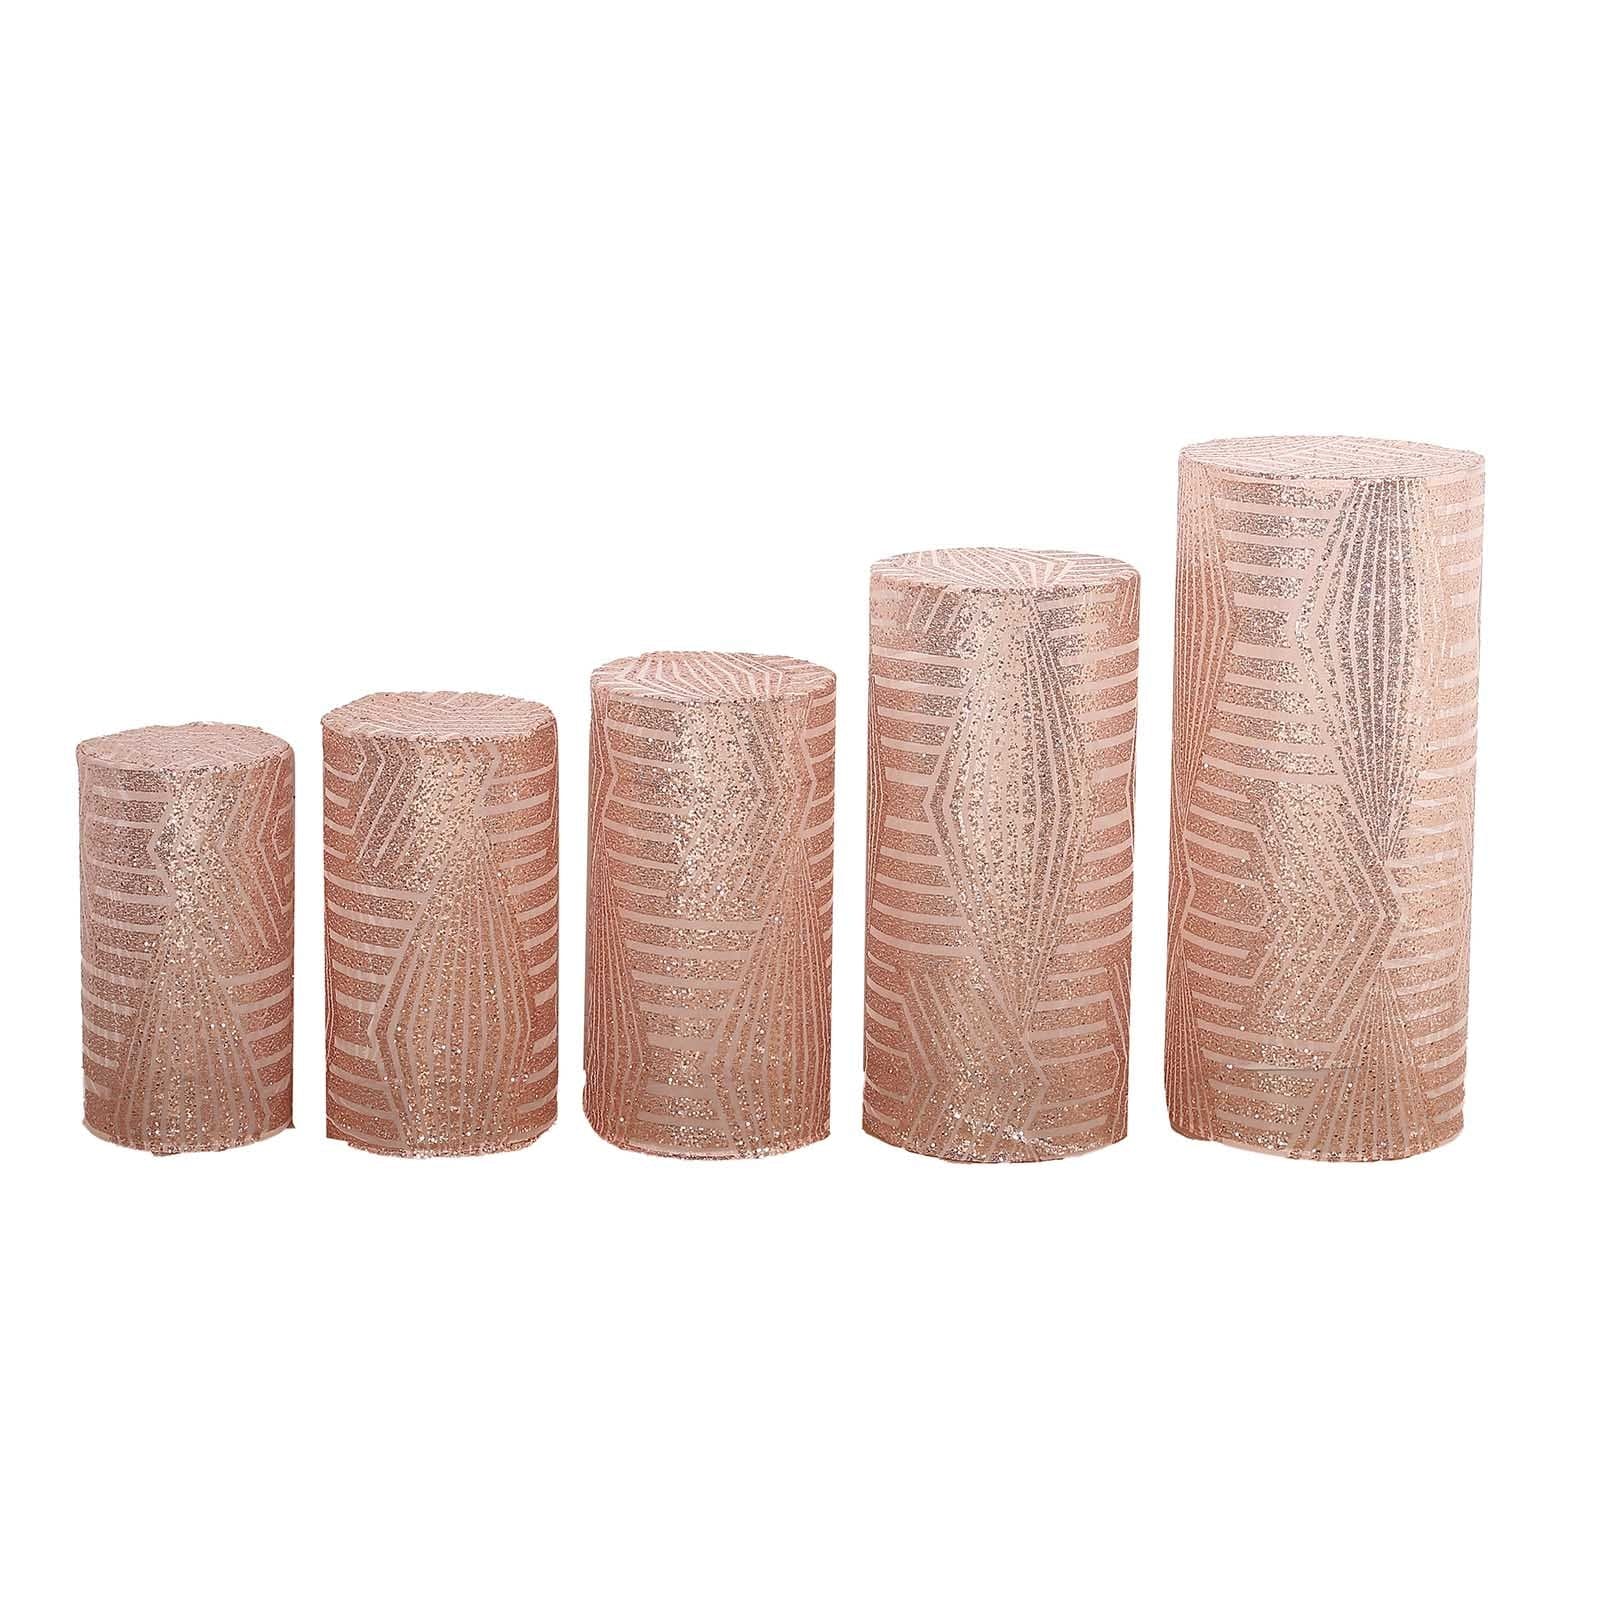 5 Sequin Mesh Cylinder Display Box Stand Covers with Geometric Pattern Embroidery PROP_BOX_006_02G_046